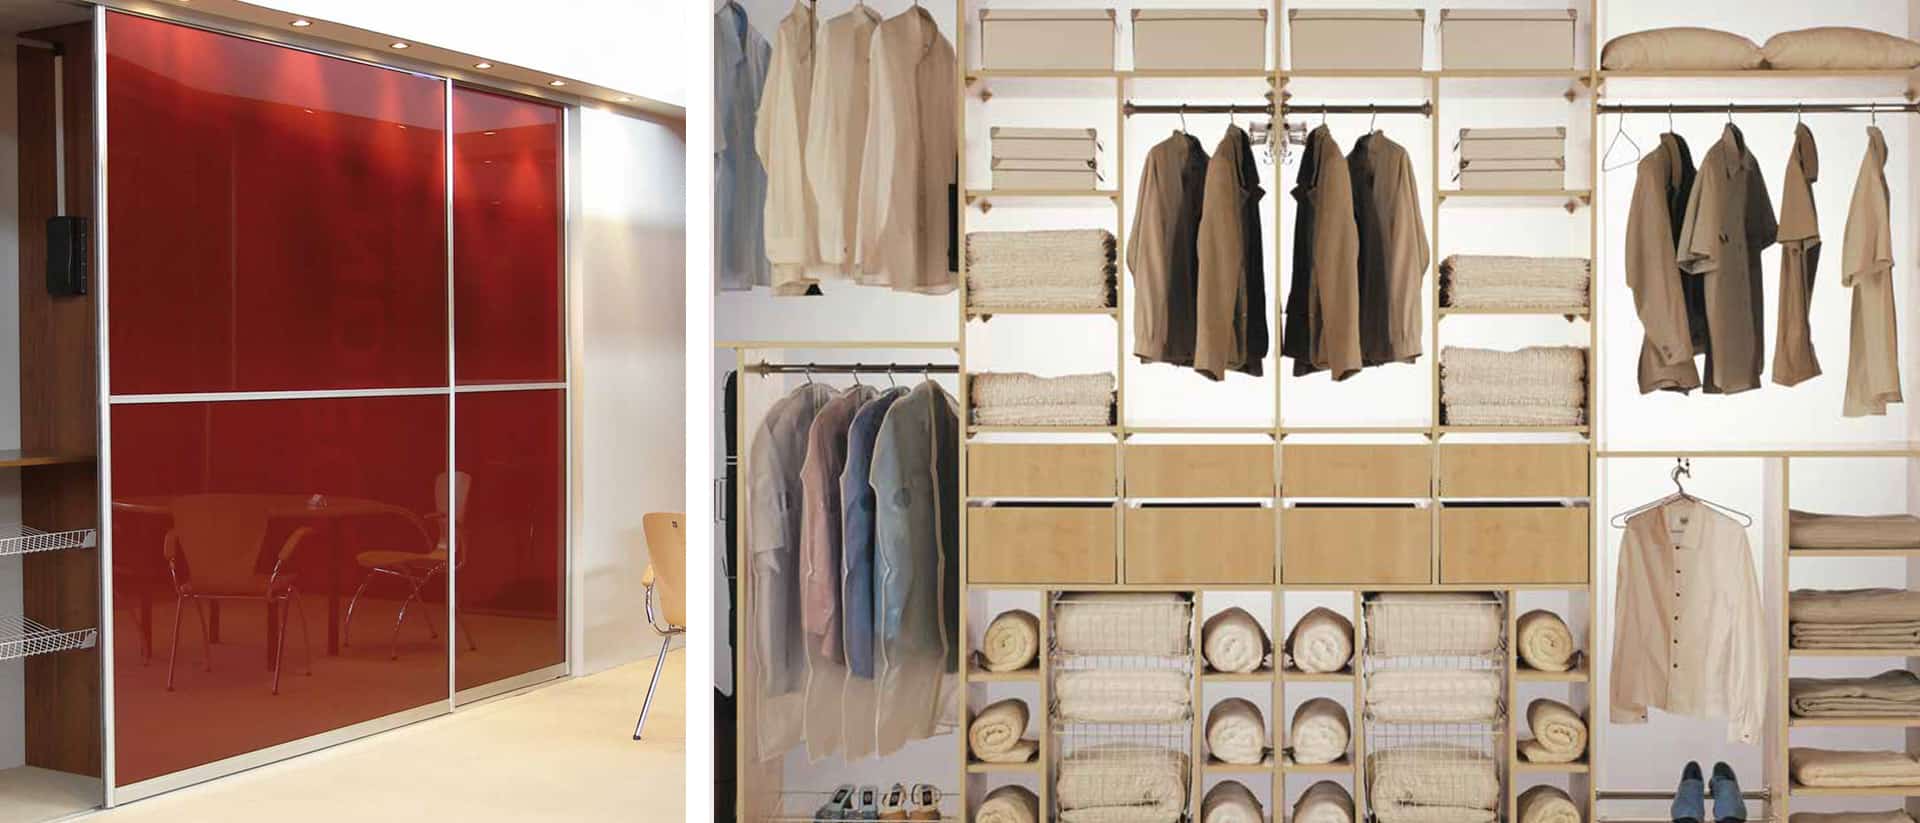 Walk in closet with cloth and shelf at home